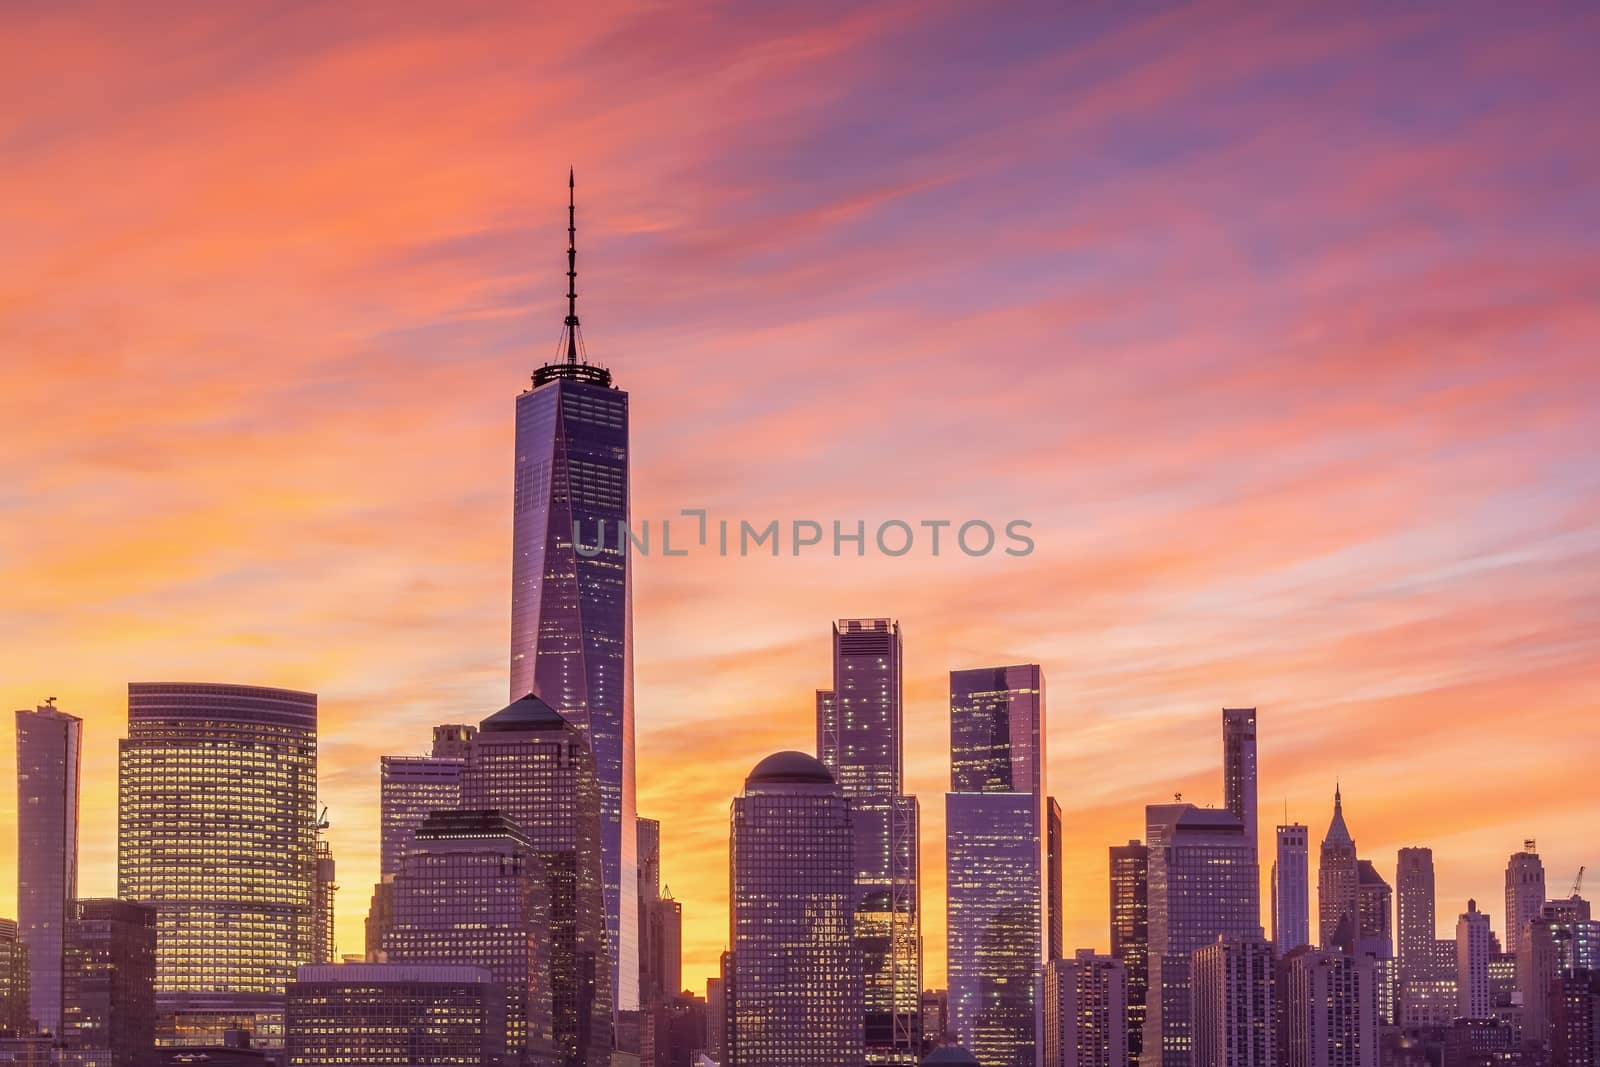 New York City downtown skyline at sunset - beautiful cityscape by f11photo